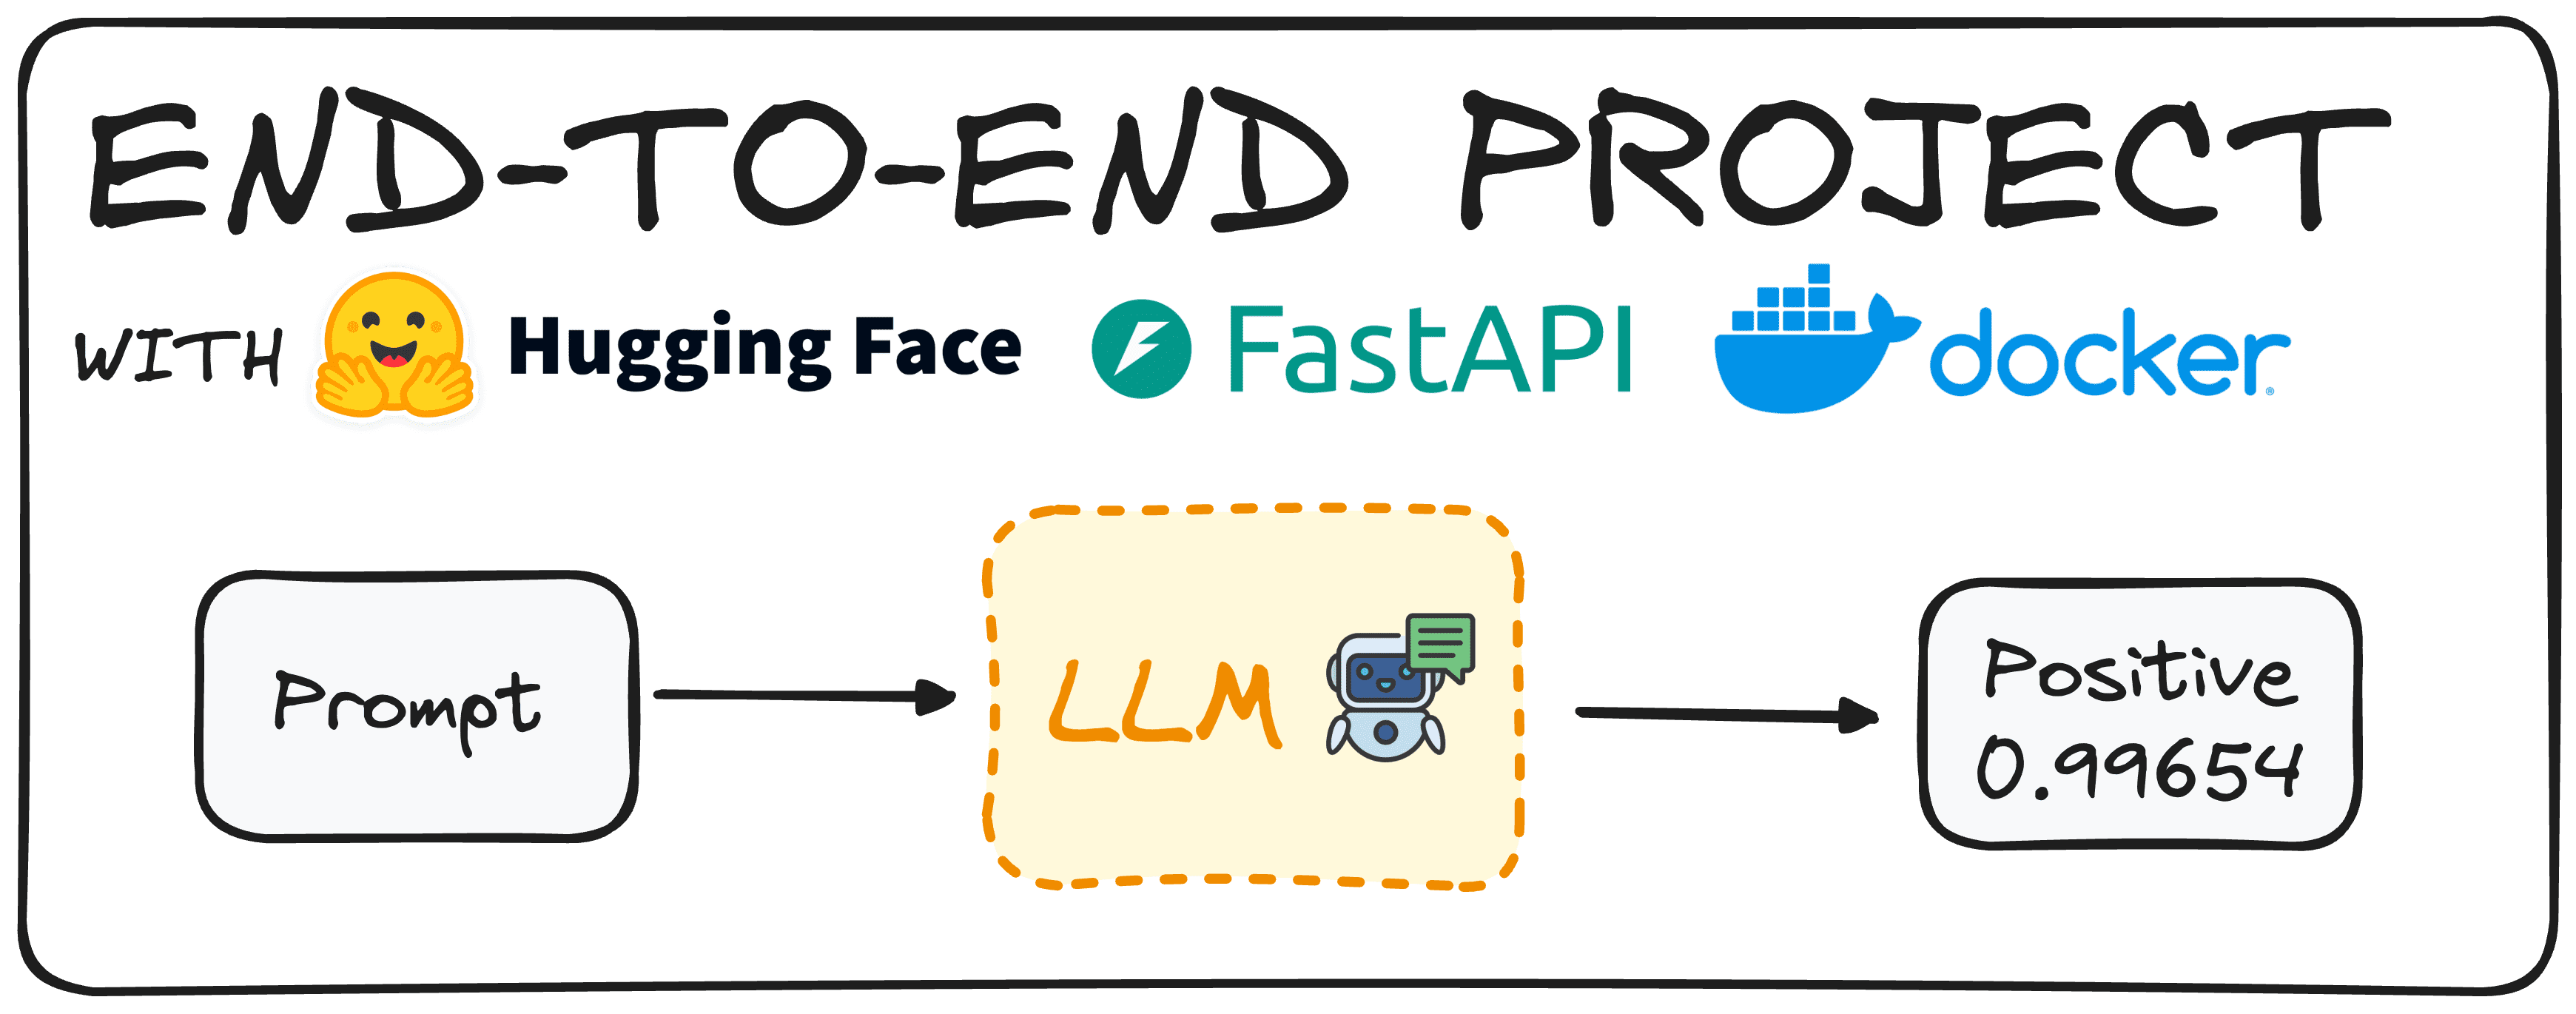 Main Cover. Generating and end-to-end project with Hugging Face, FastAPI and Docker.